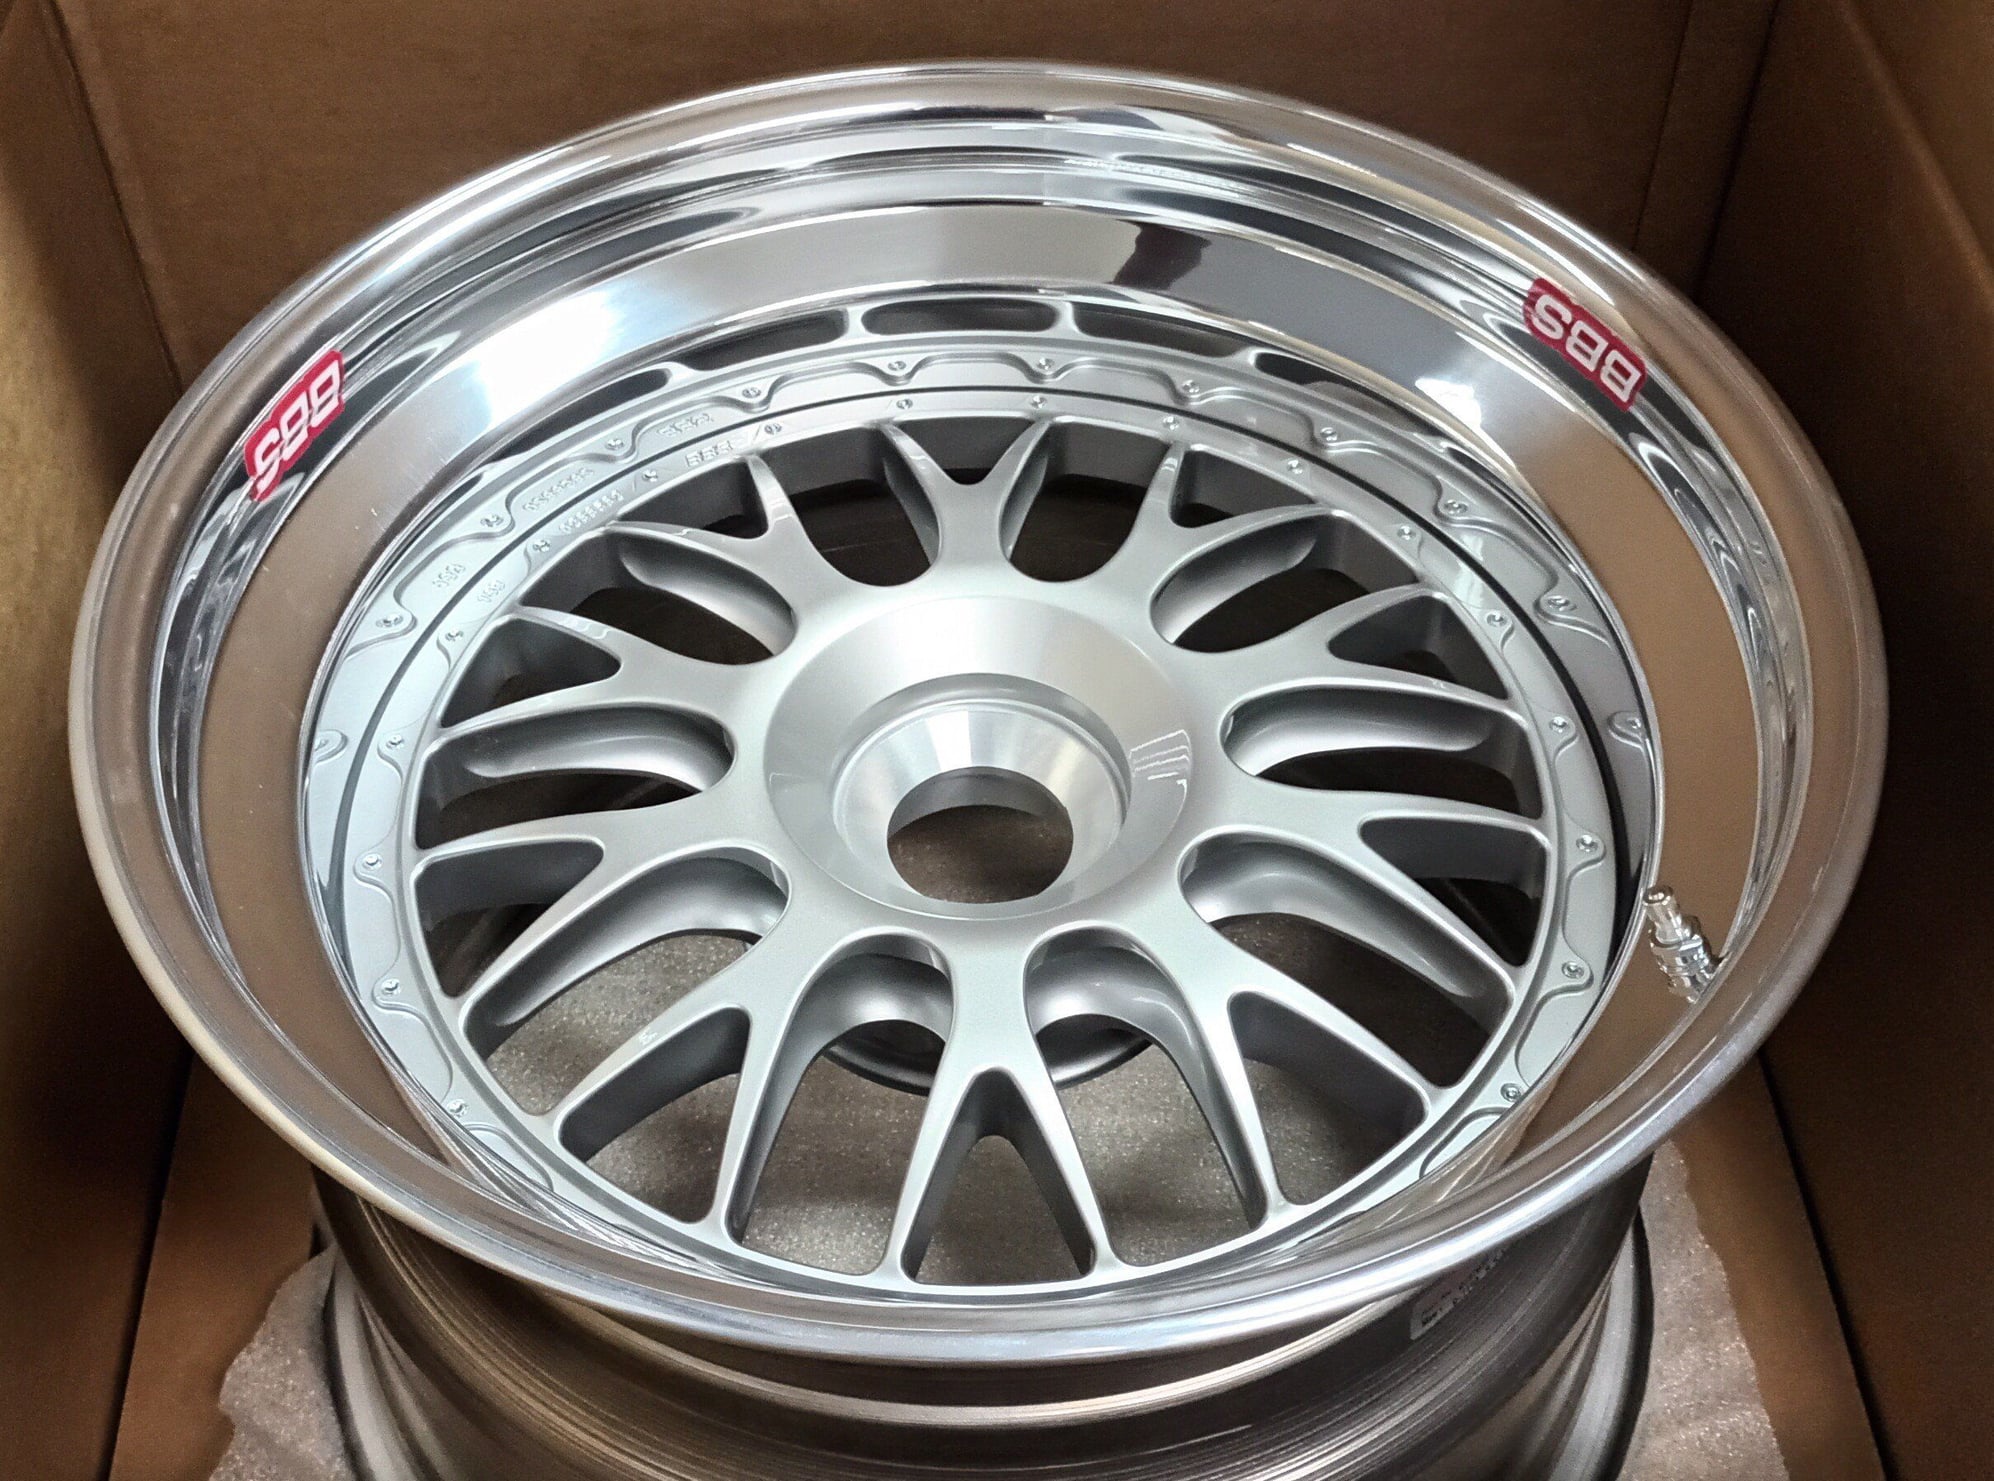 Wheels and Tires/Axles - BBS E88 19" Center lock sizes 11 and 13 ***NEW*** - New - 2012 to 2021 Porsche All Models - Maarkedal, Belgium